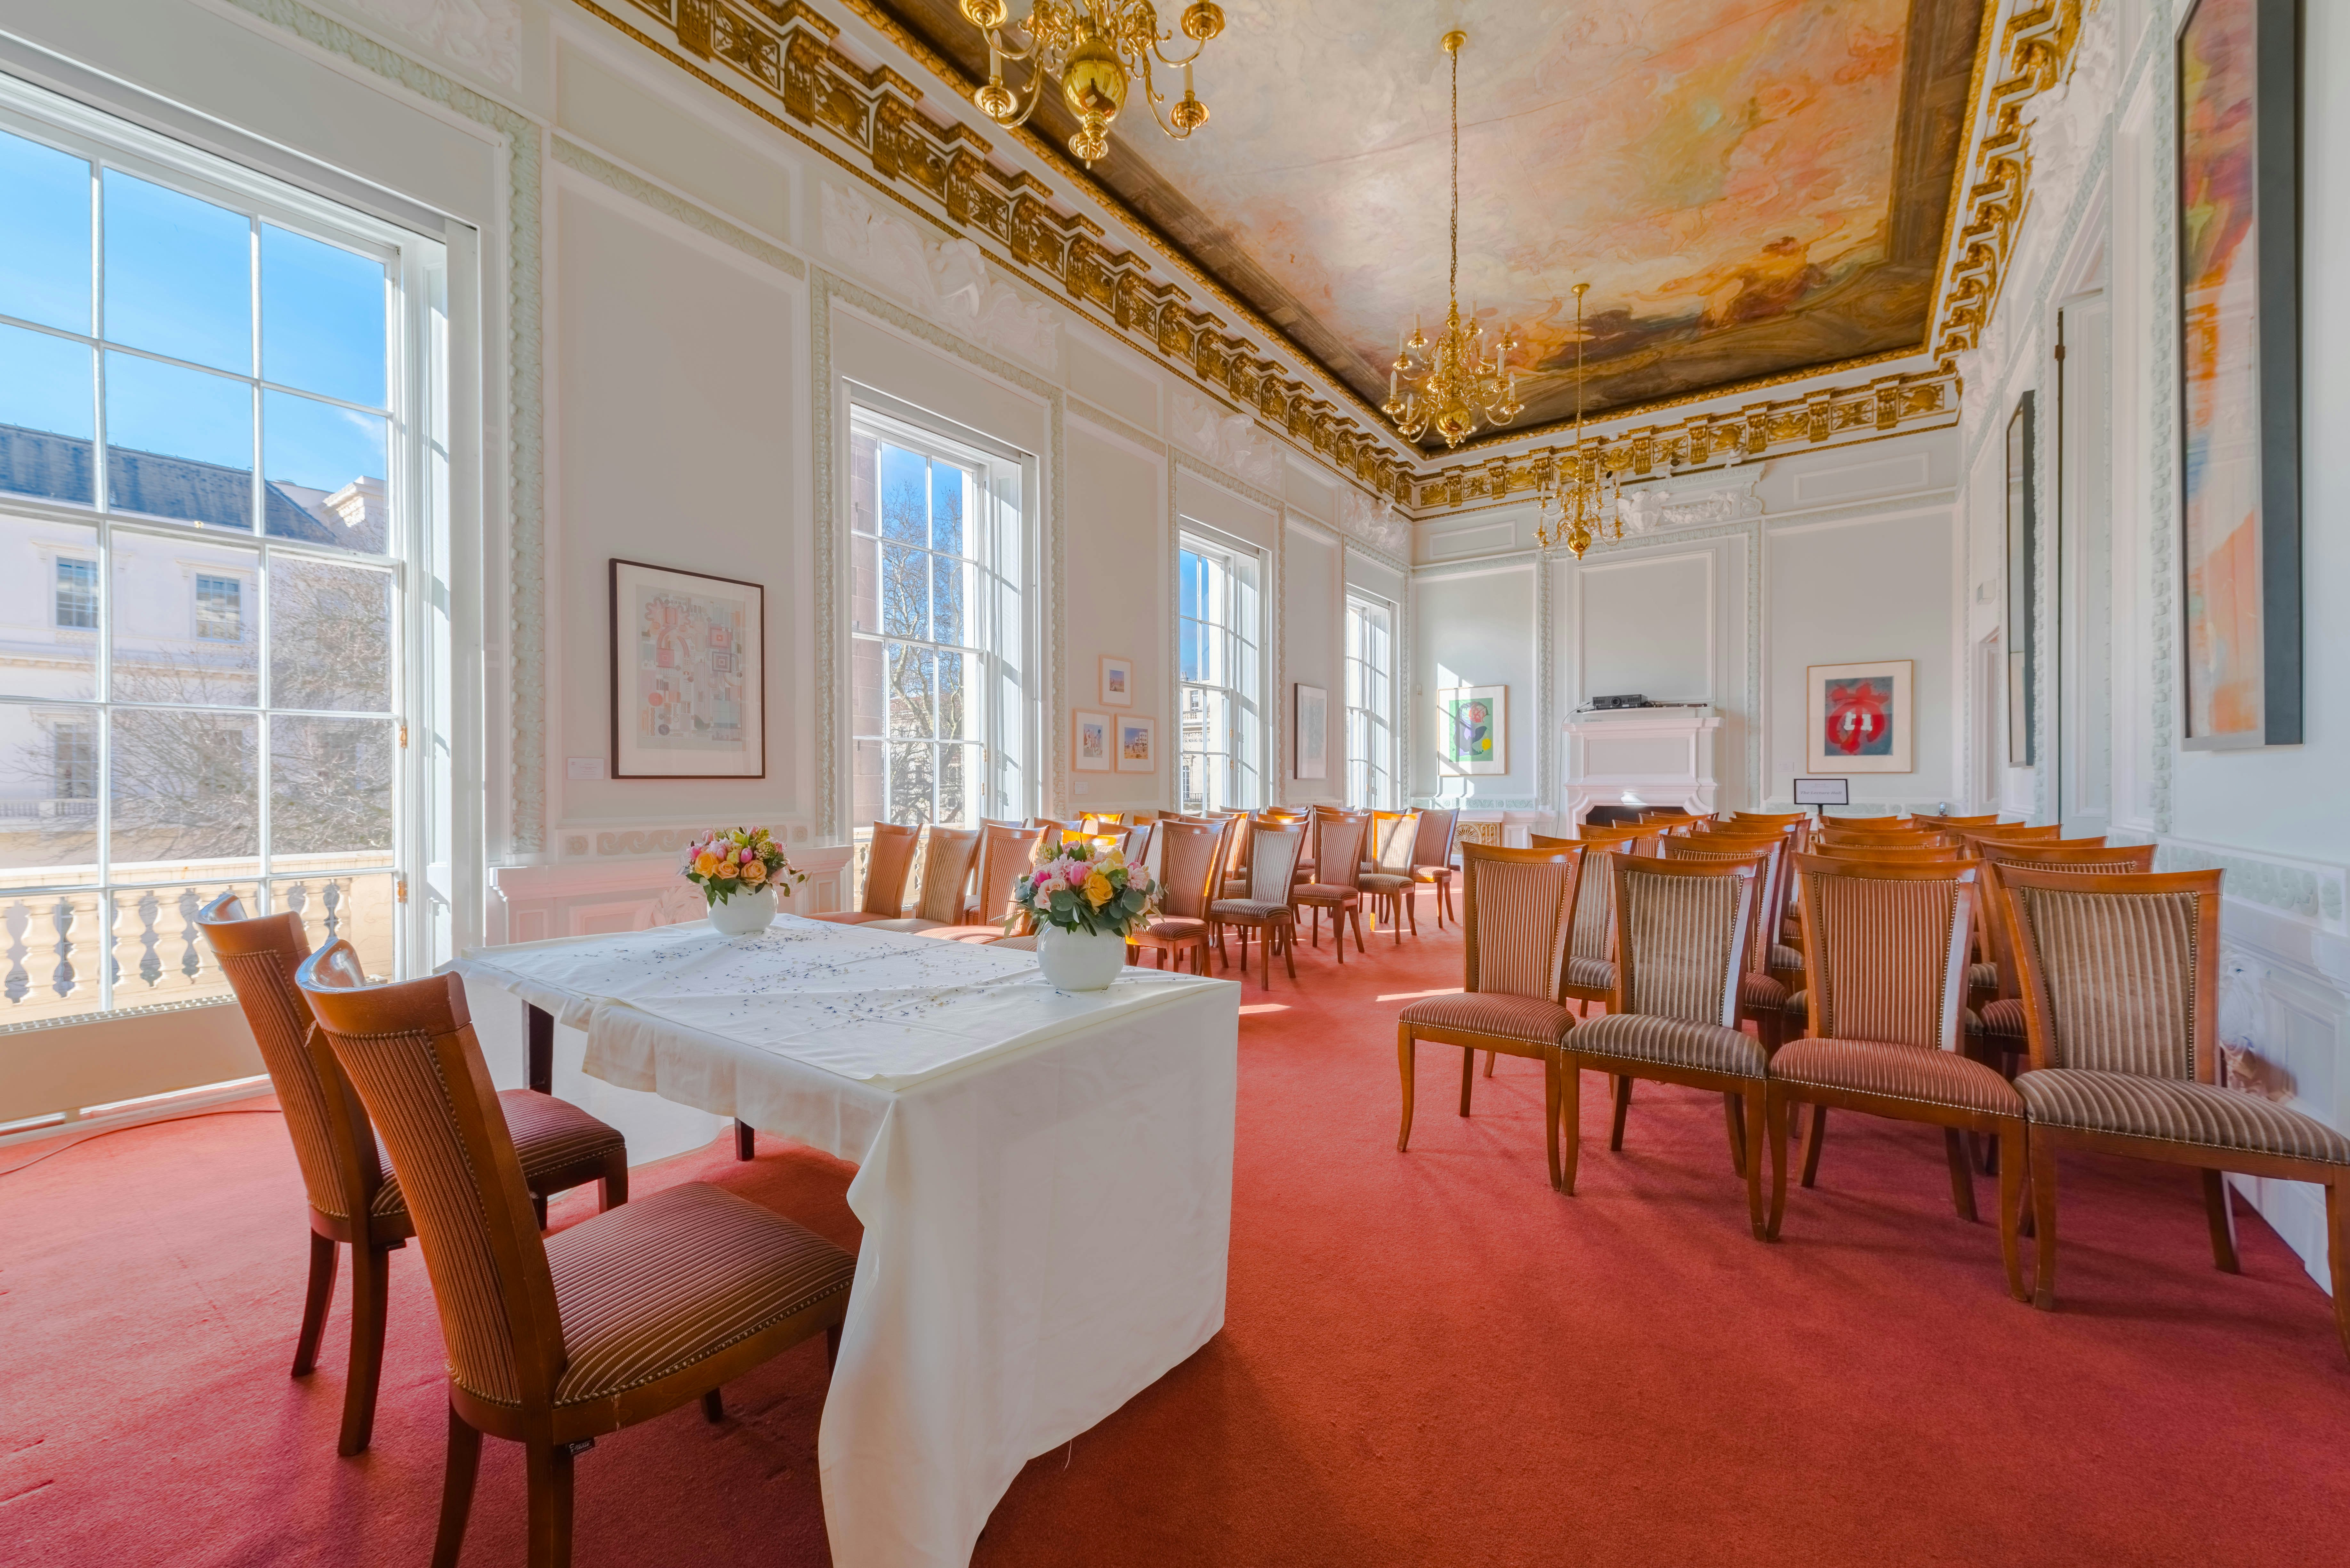 Panel Discussion Venues in London - {10-11} Carlton House Terrace